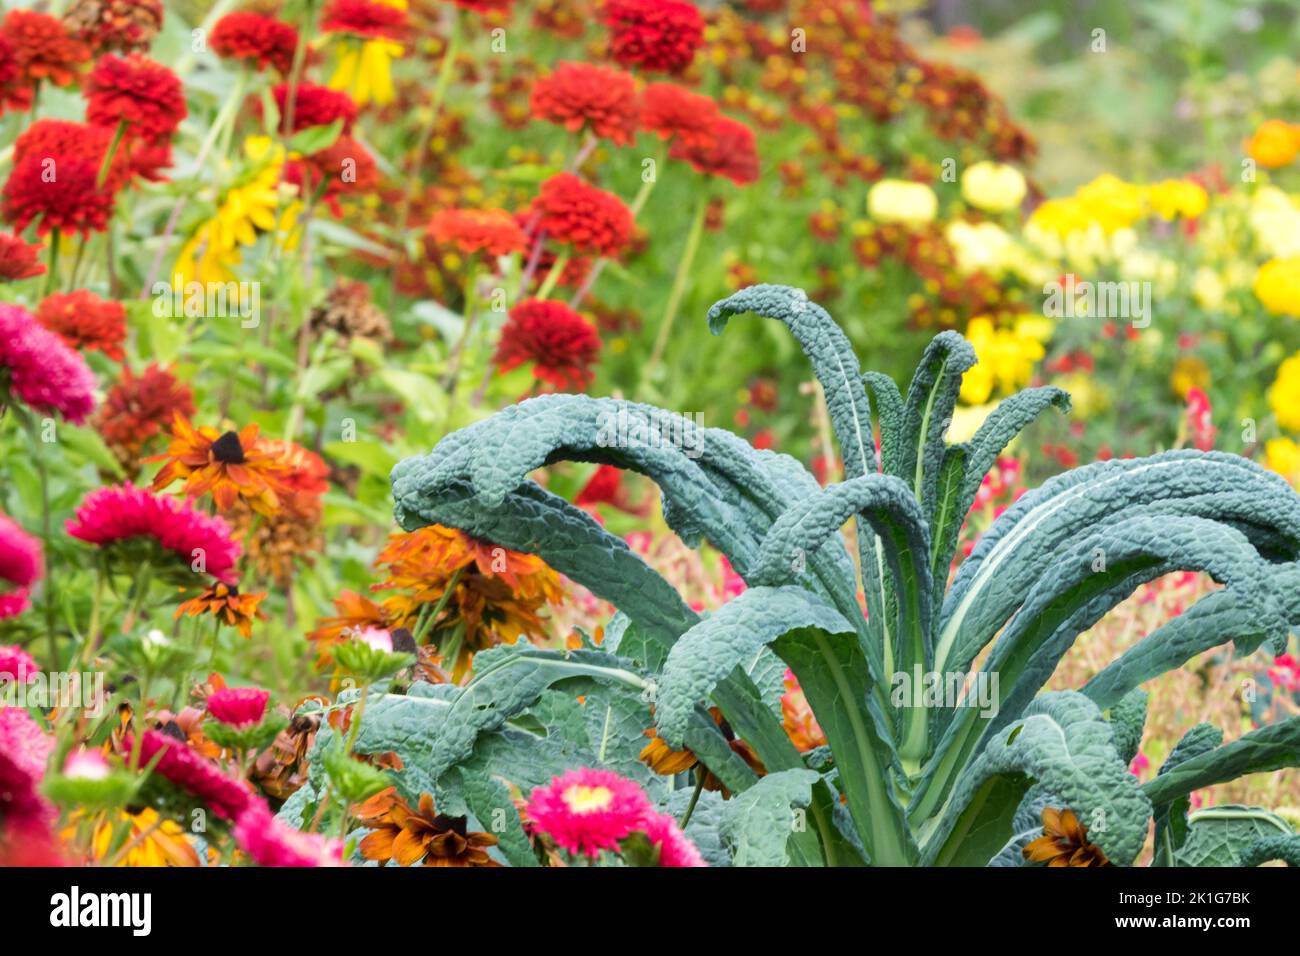 Kale, Plant, Brassica oleracea acephala, Flower bed, Colourful, Bed, Zinnias August Stock Photo